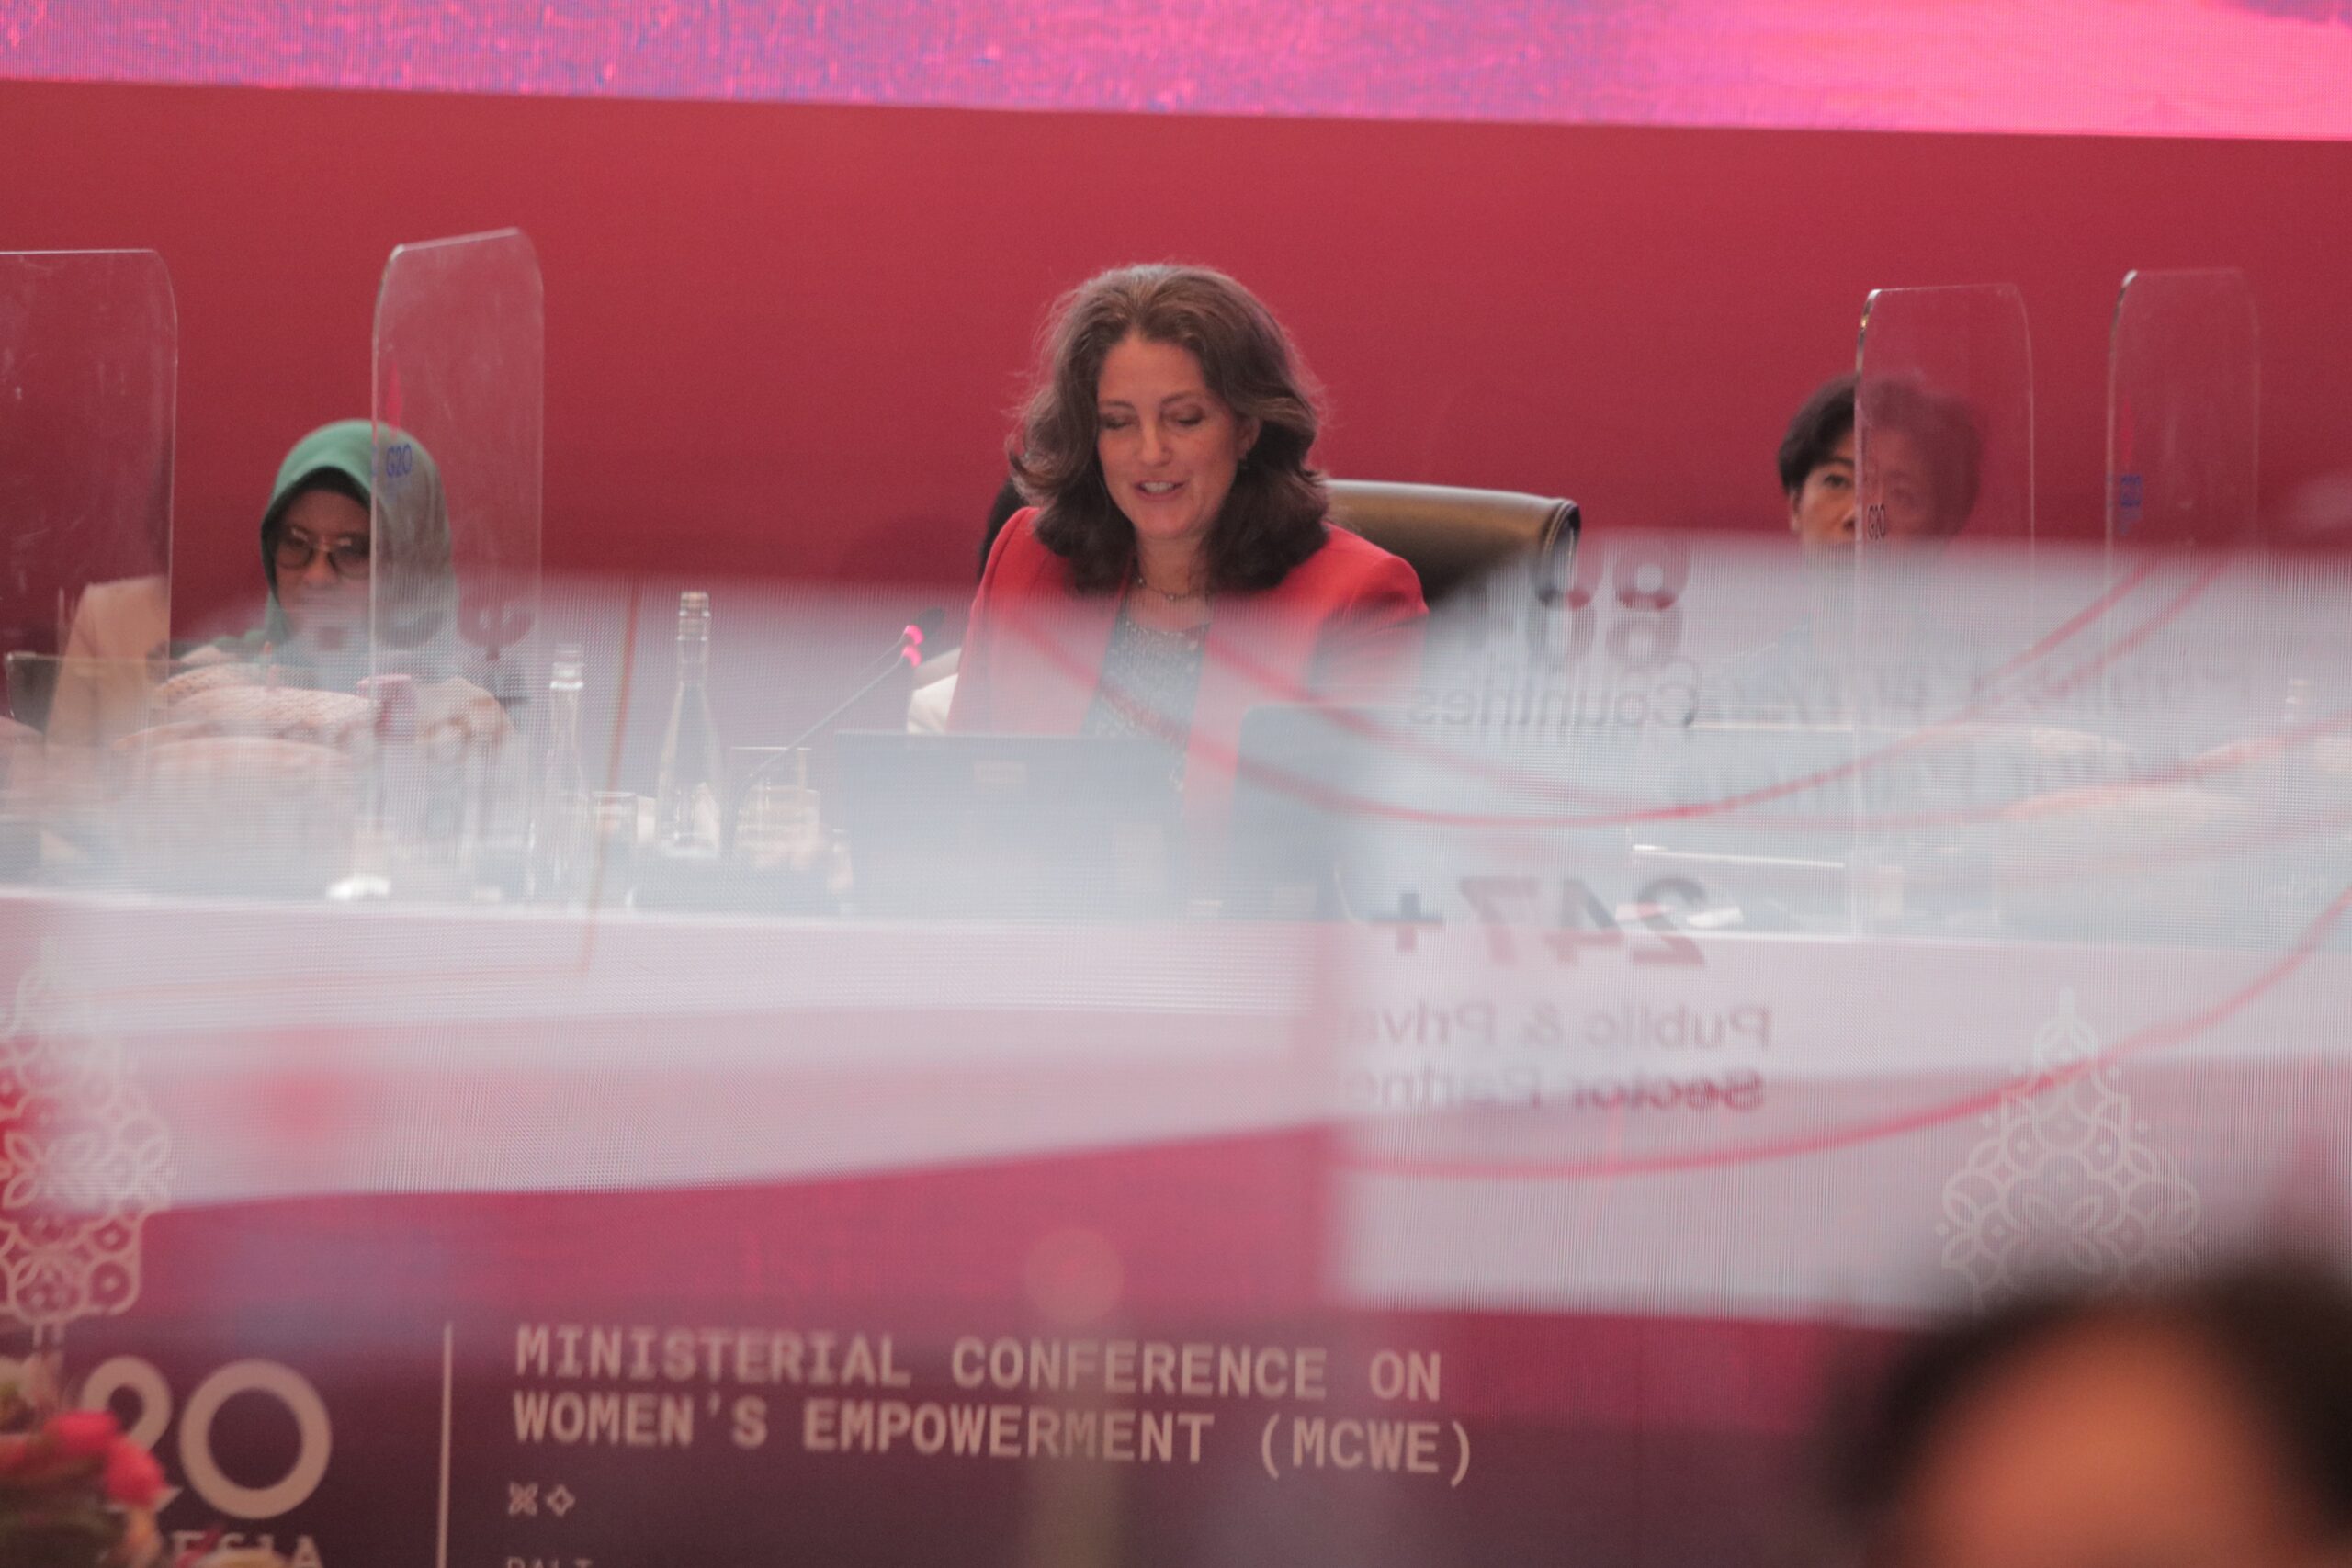 We-Fi at G20 Ministerial Conference on Women’s Empowerment